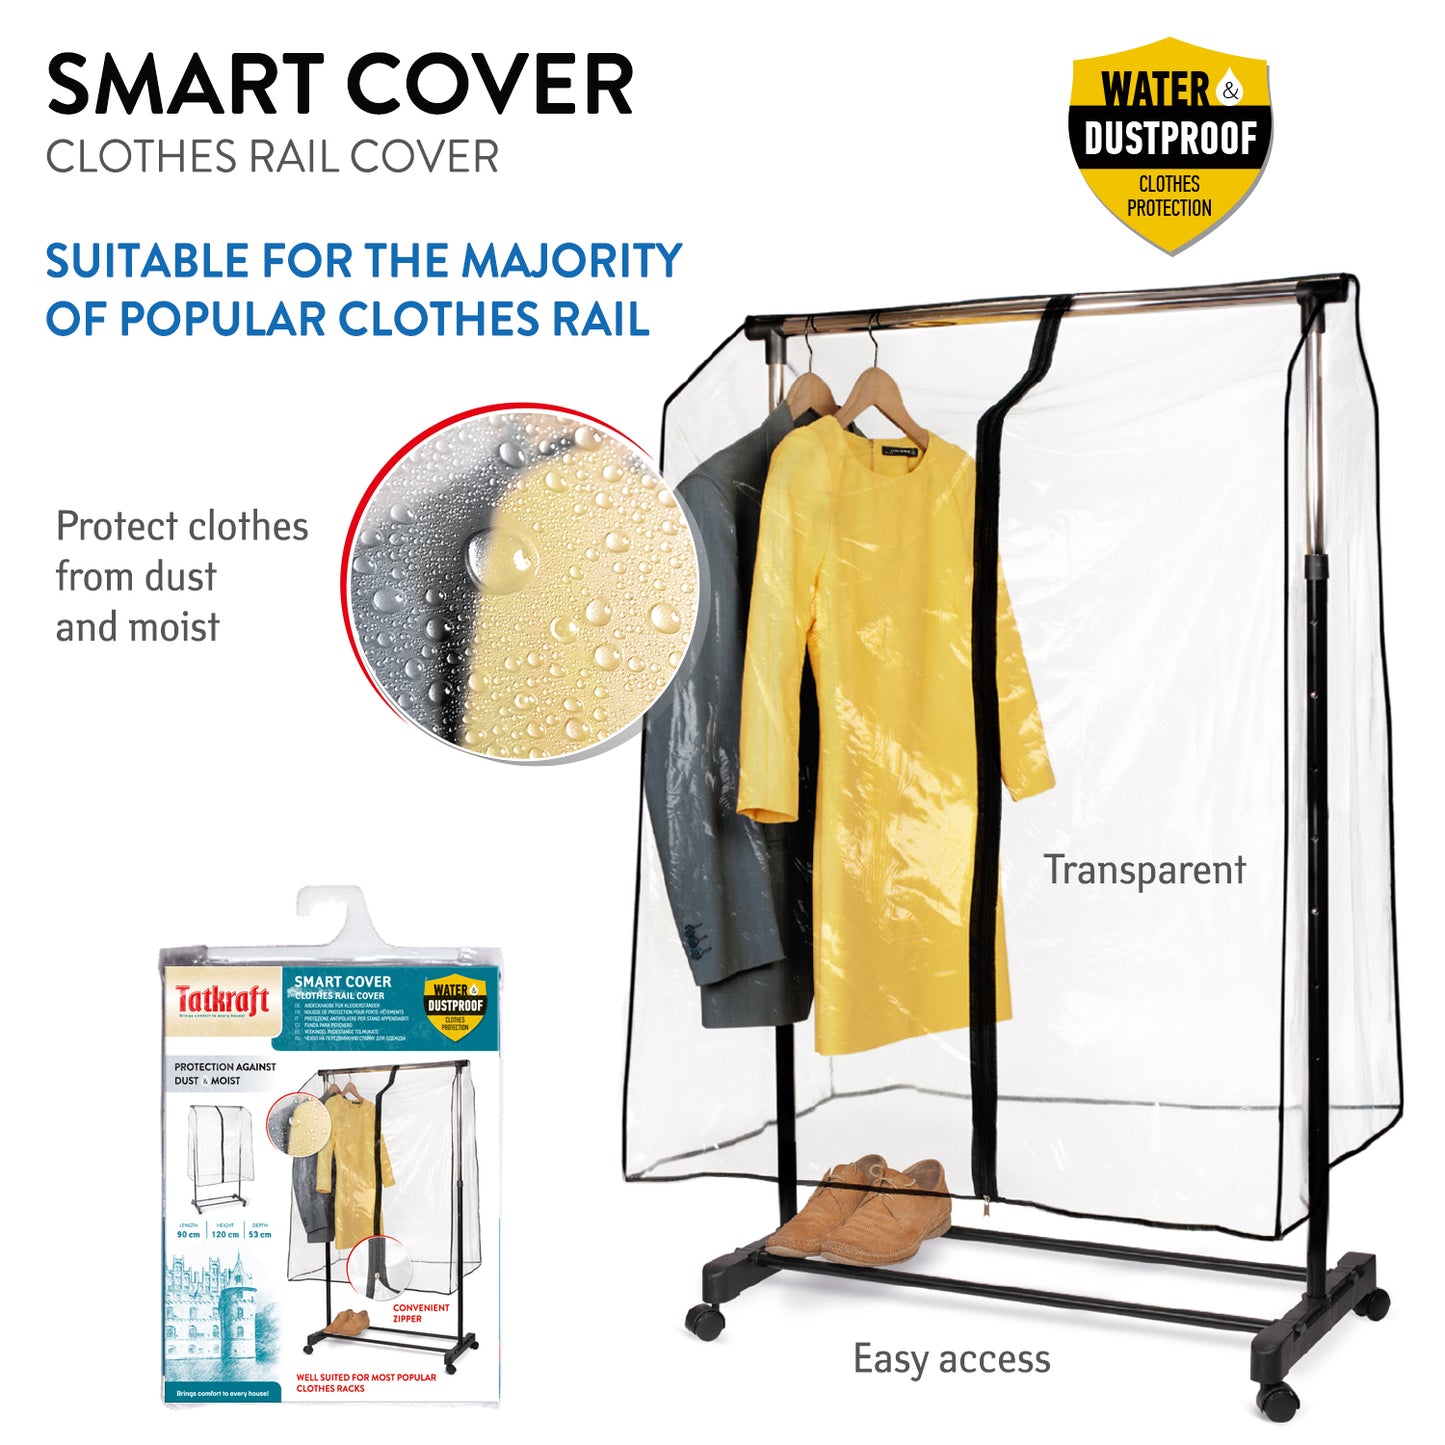 Cover for Clothes Rails keeps Clothes Free from Dust and Dirt, Garment Rack Protection Cover, Tatkraft Smart, 6